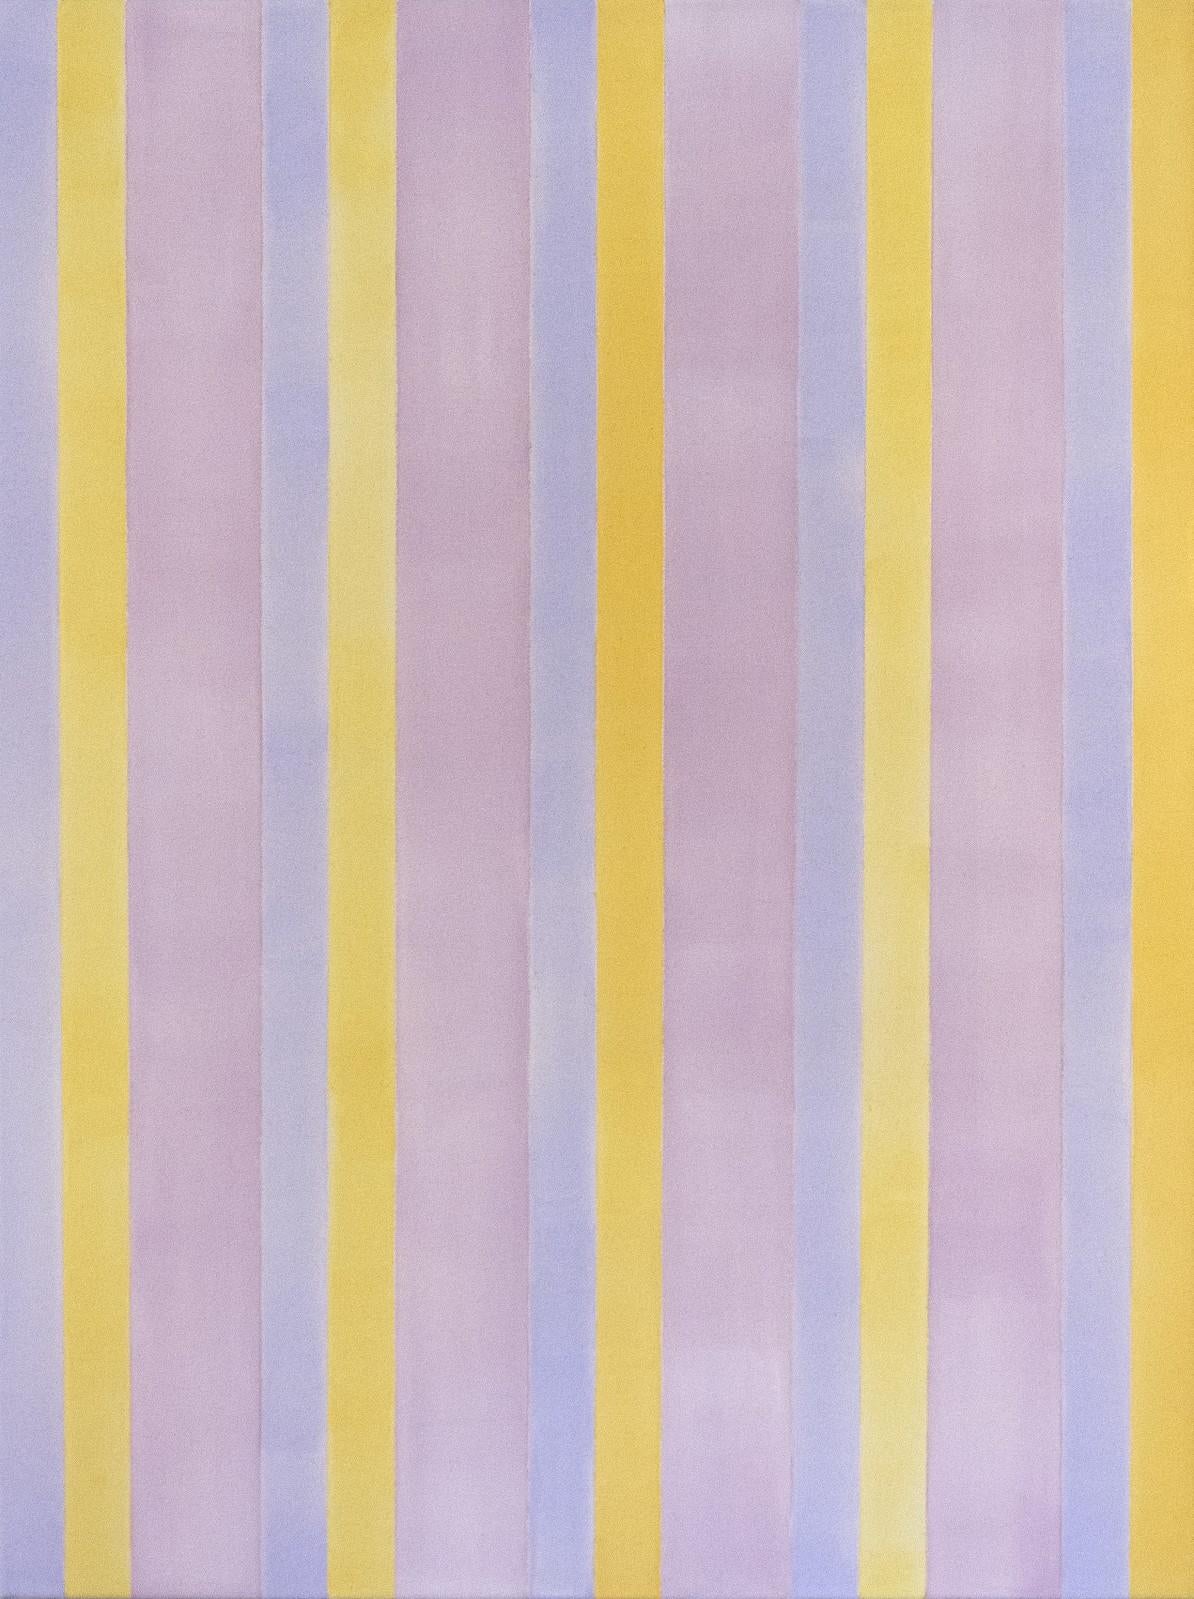 Milly Ristvedt Abstract Painting - Evening Light - Twinned vertical bands in lilac and golden yellow